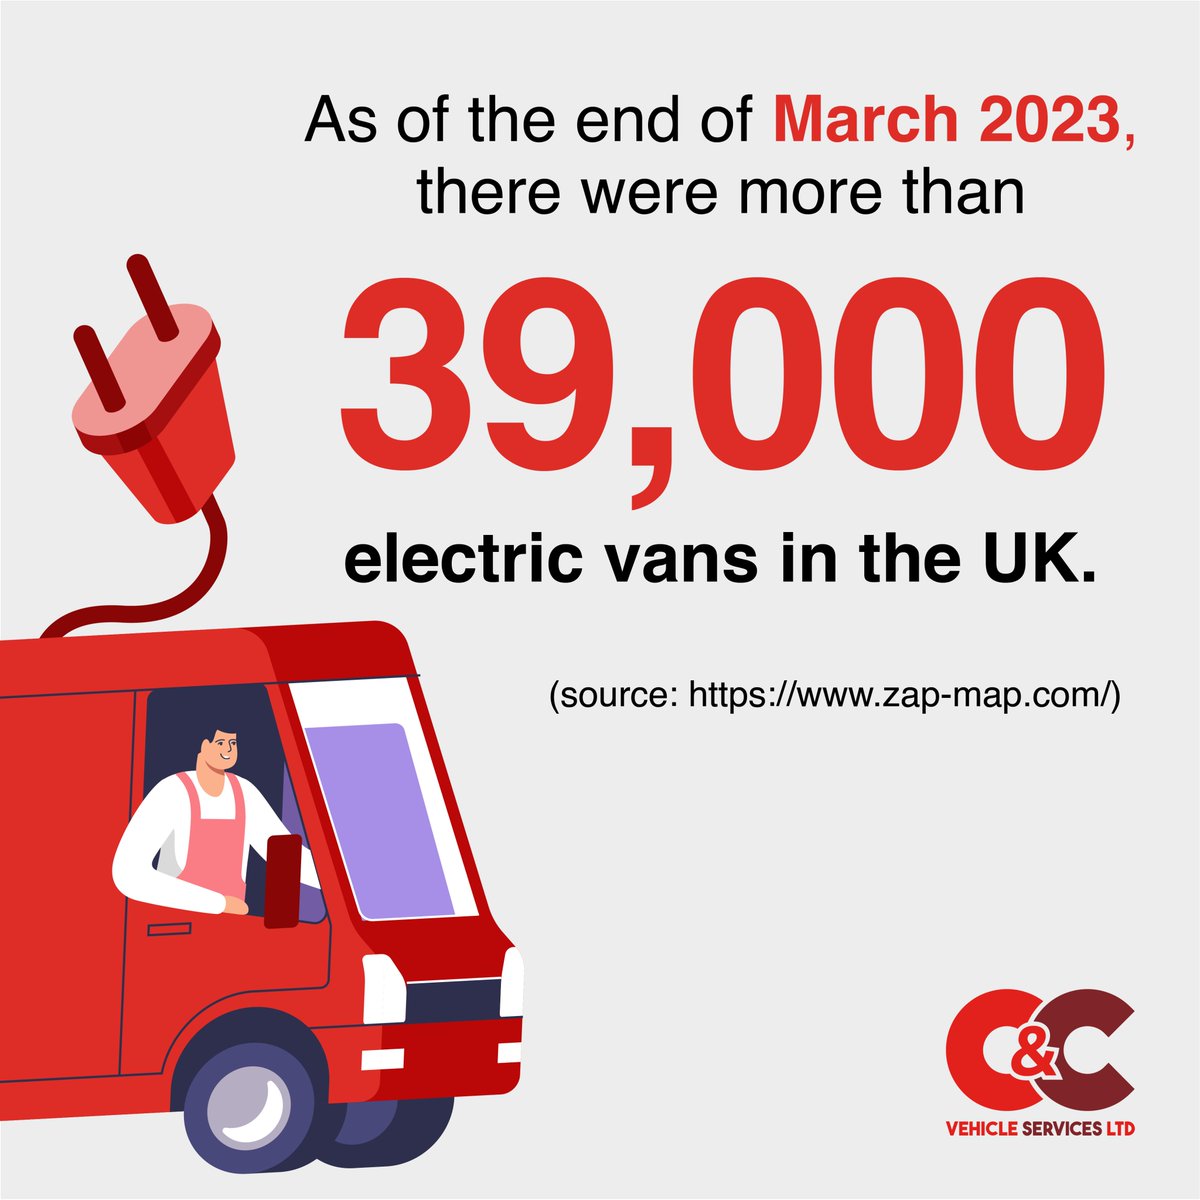 Last year, the number of electric vans sold in the UK picked up significantly.

As fleets become more eco friendly, we're helping repair them!

#EV #Fleets #CommercialVehicles